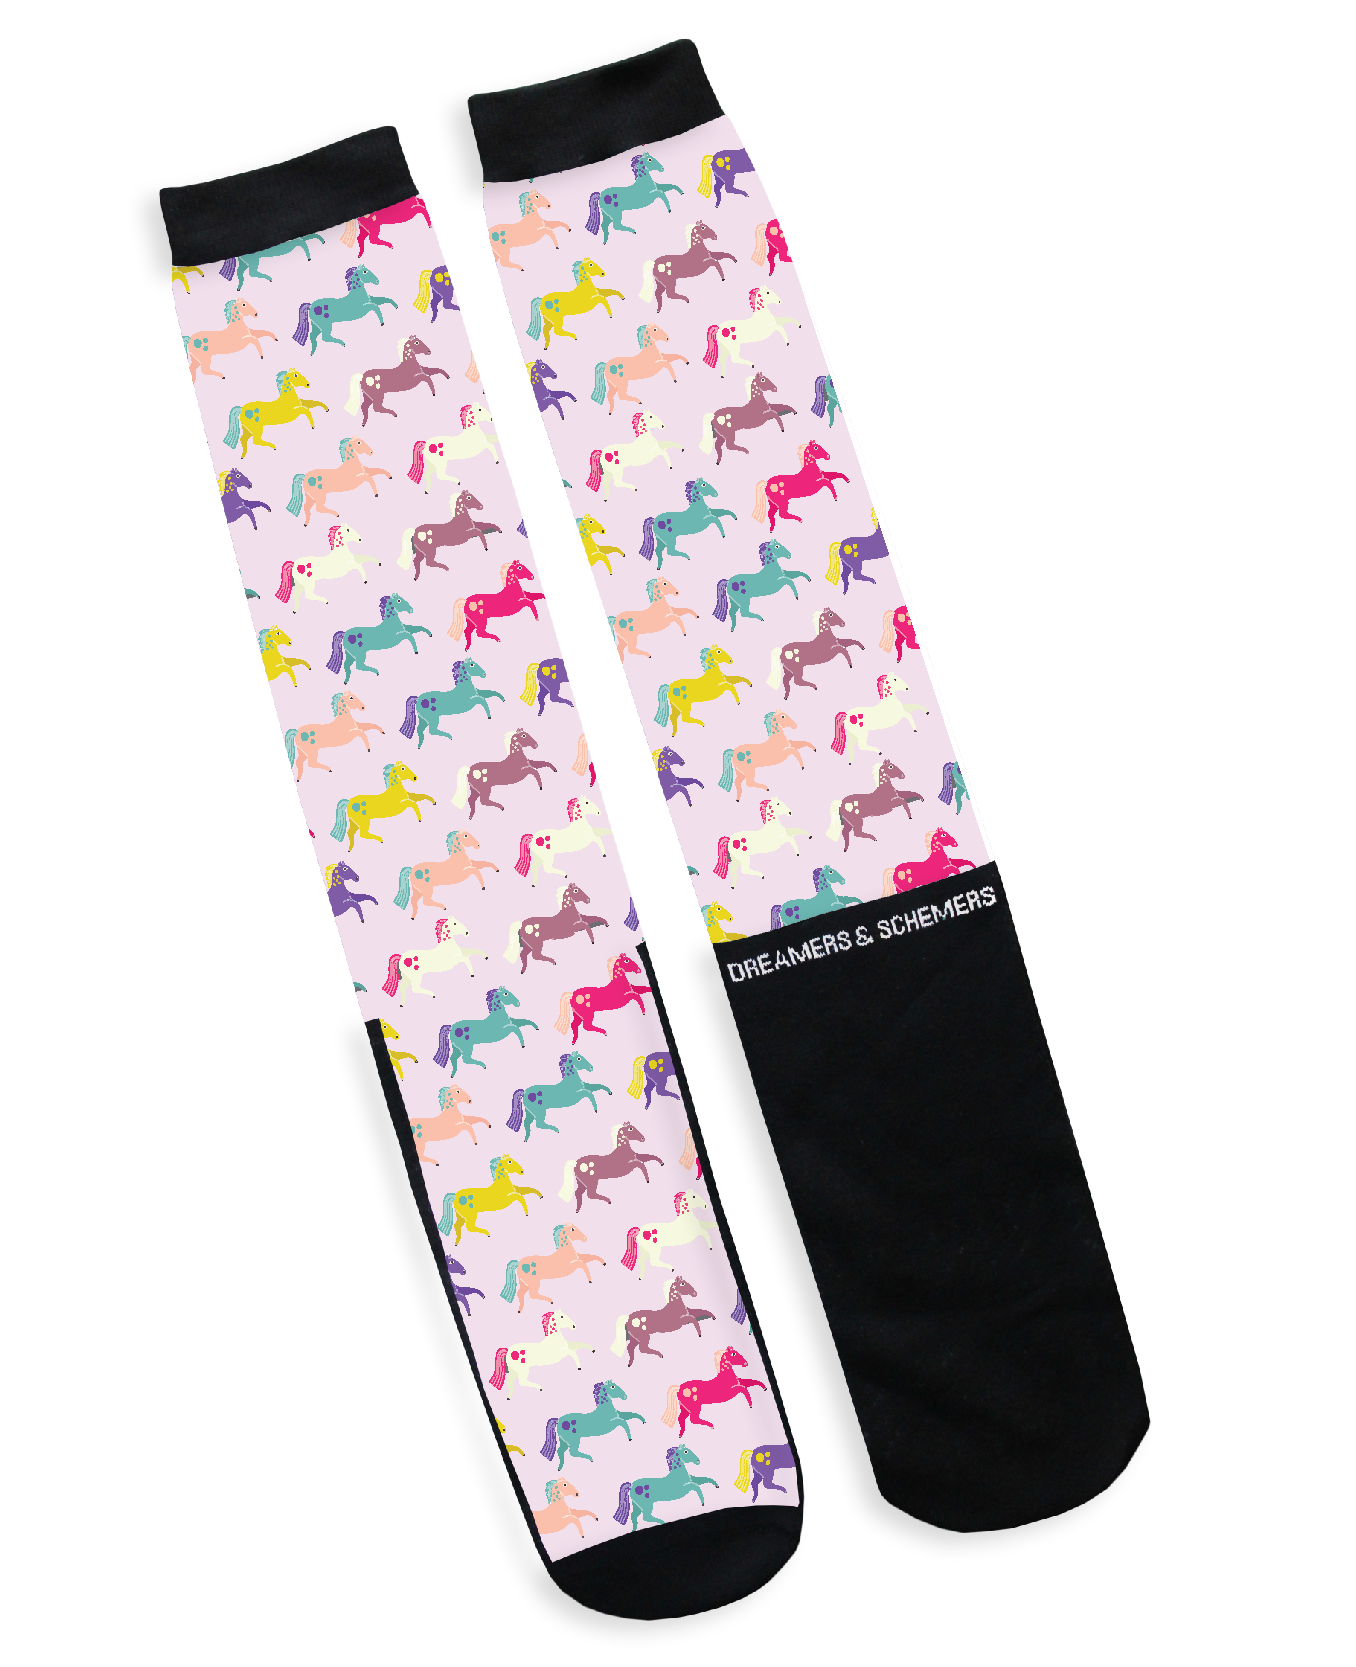 Dreamers & Schemers Boot Socks - Cheval - Original Pair & A Spare